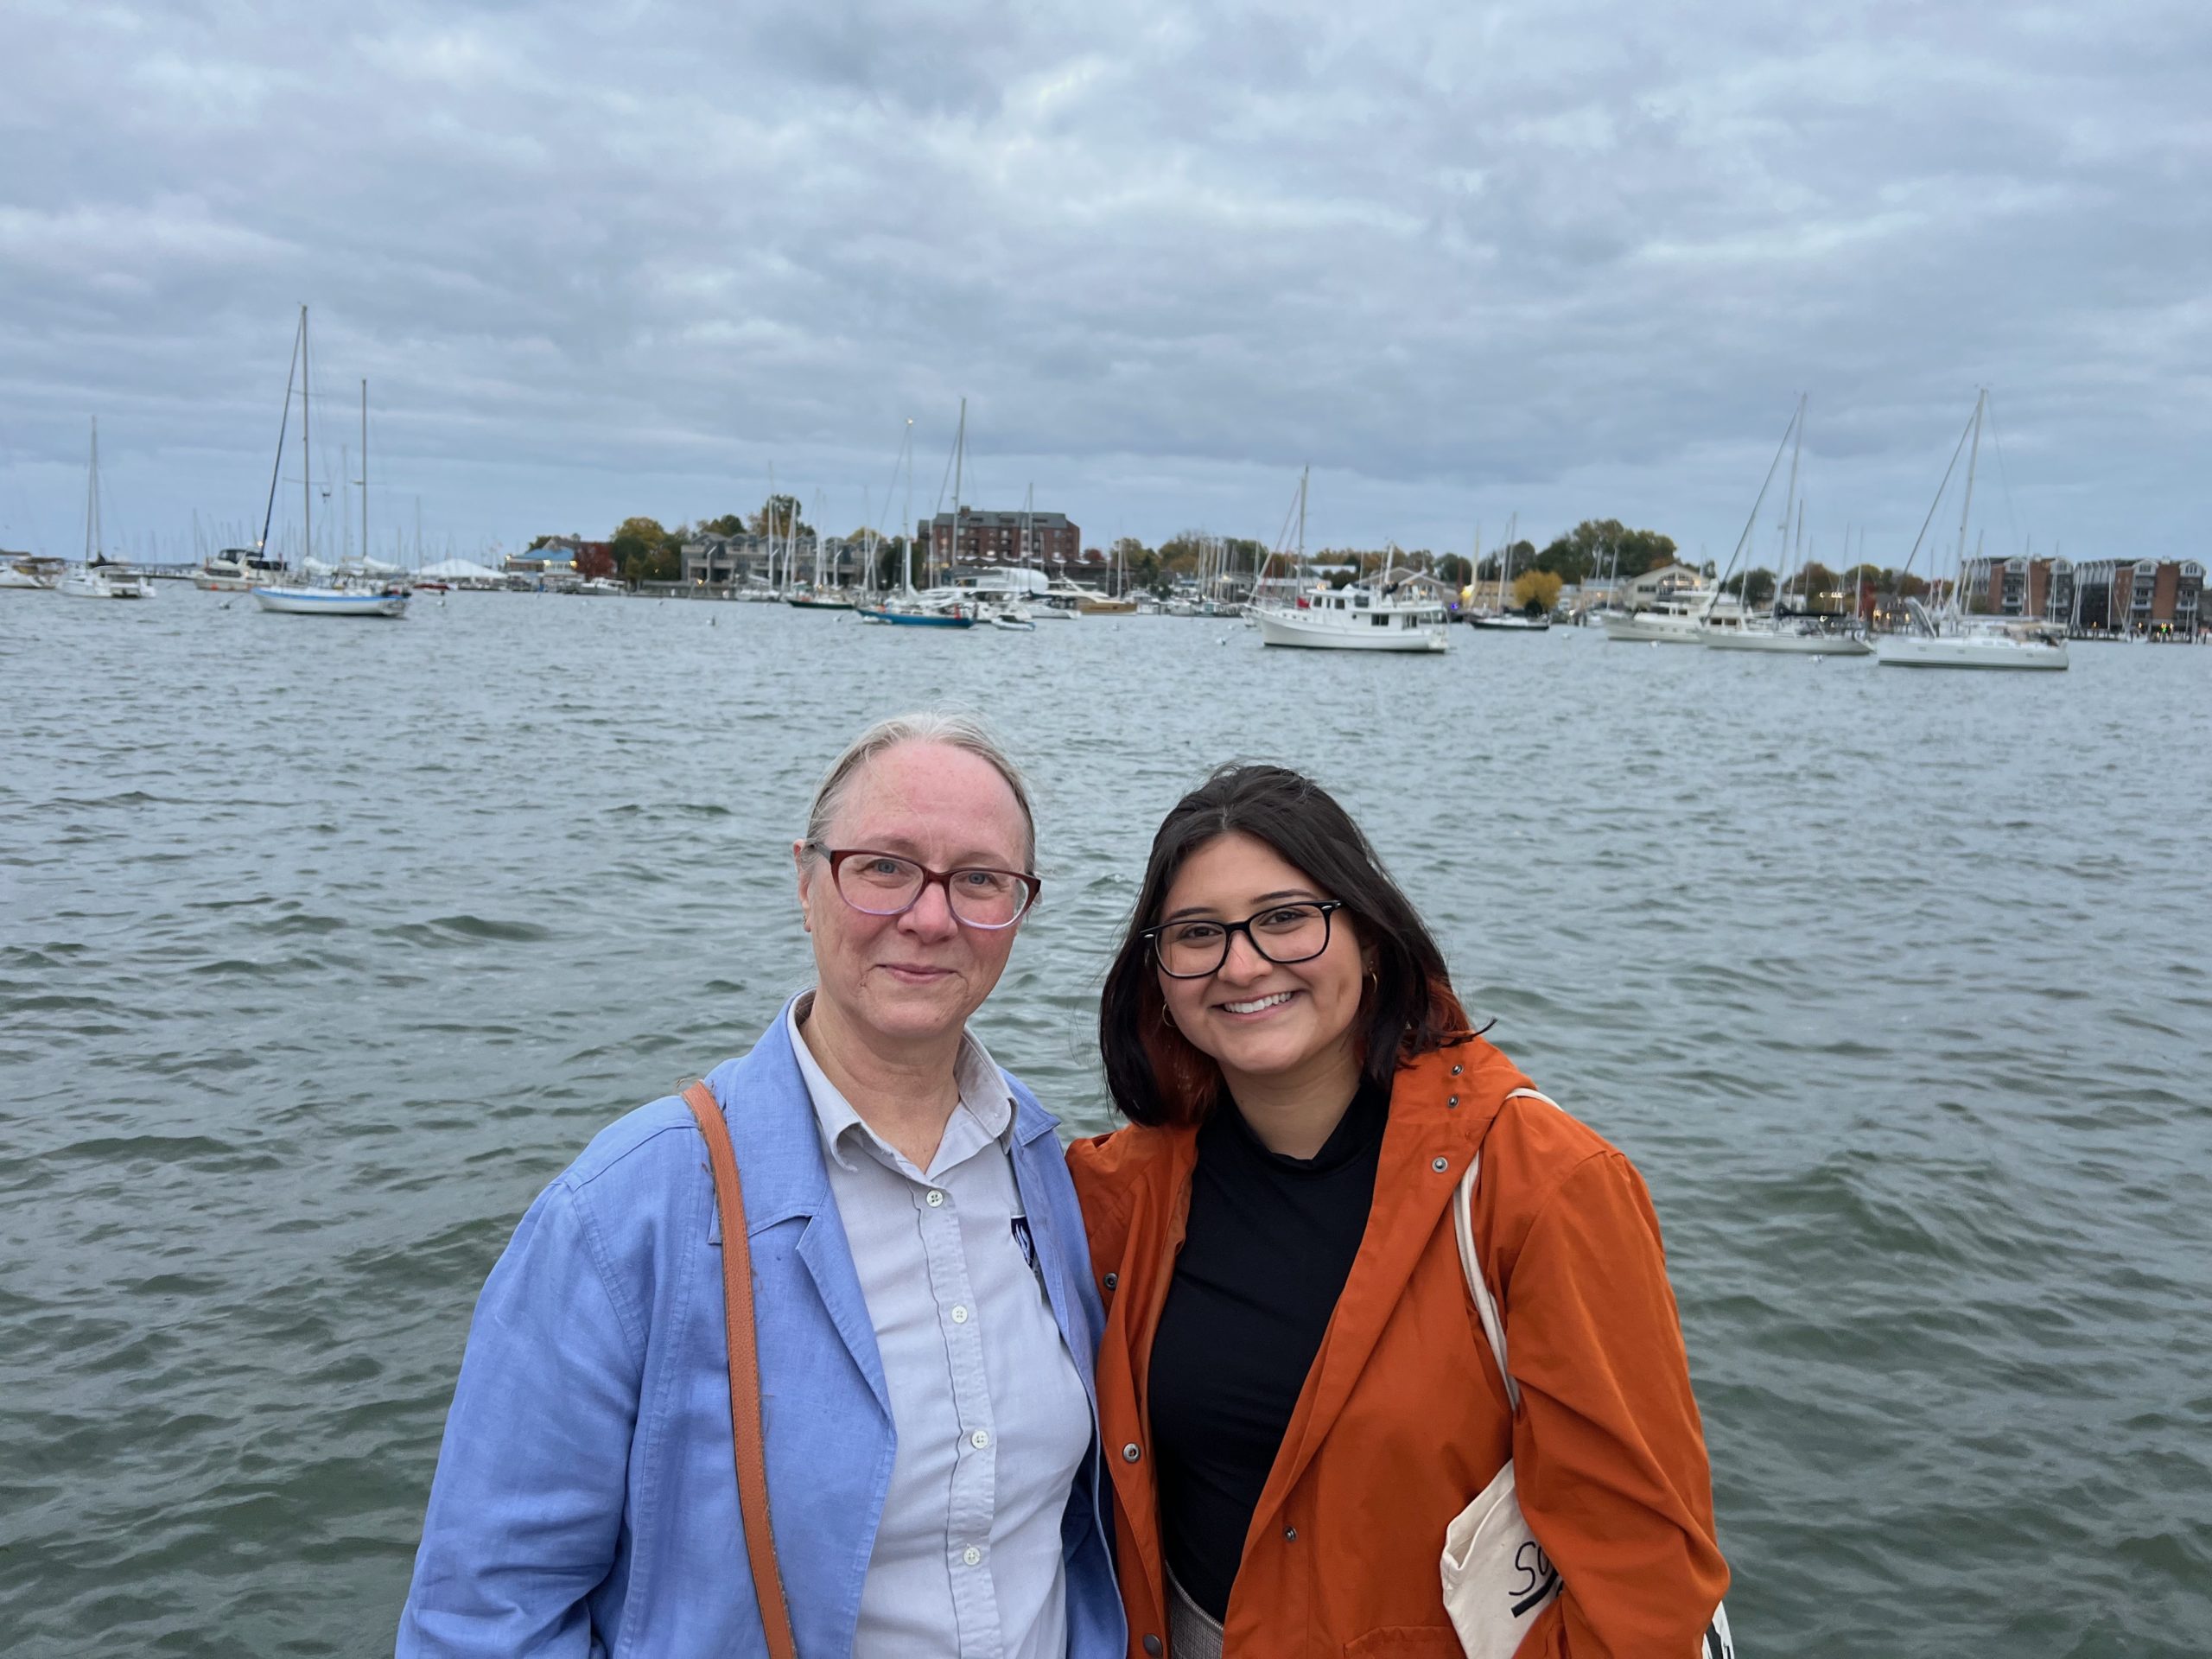 Jean Norman and Alexandrea Bonilla at the pier in Annapolis, Maryland in August of 2022.